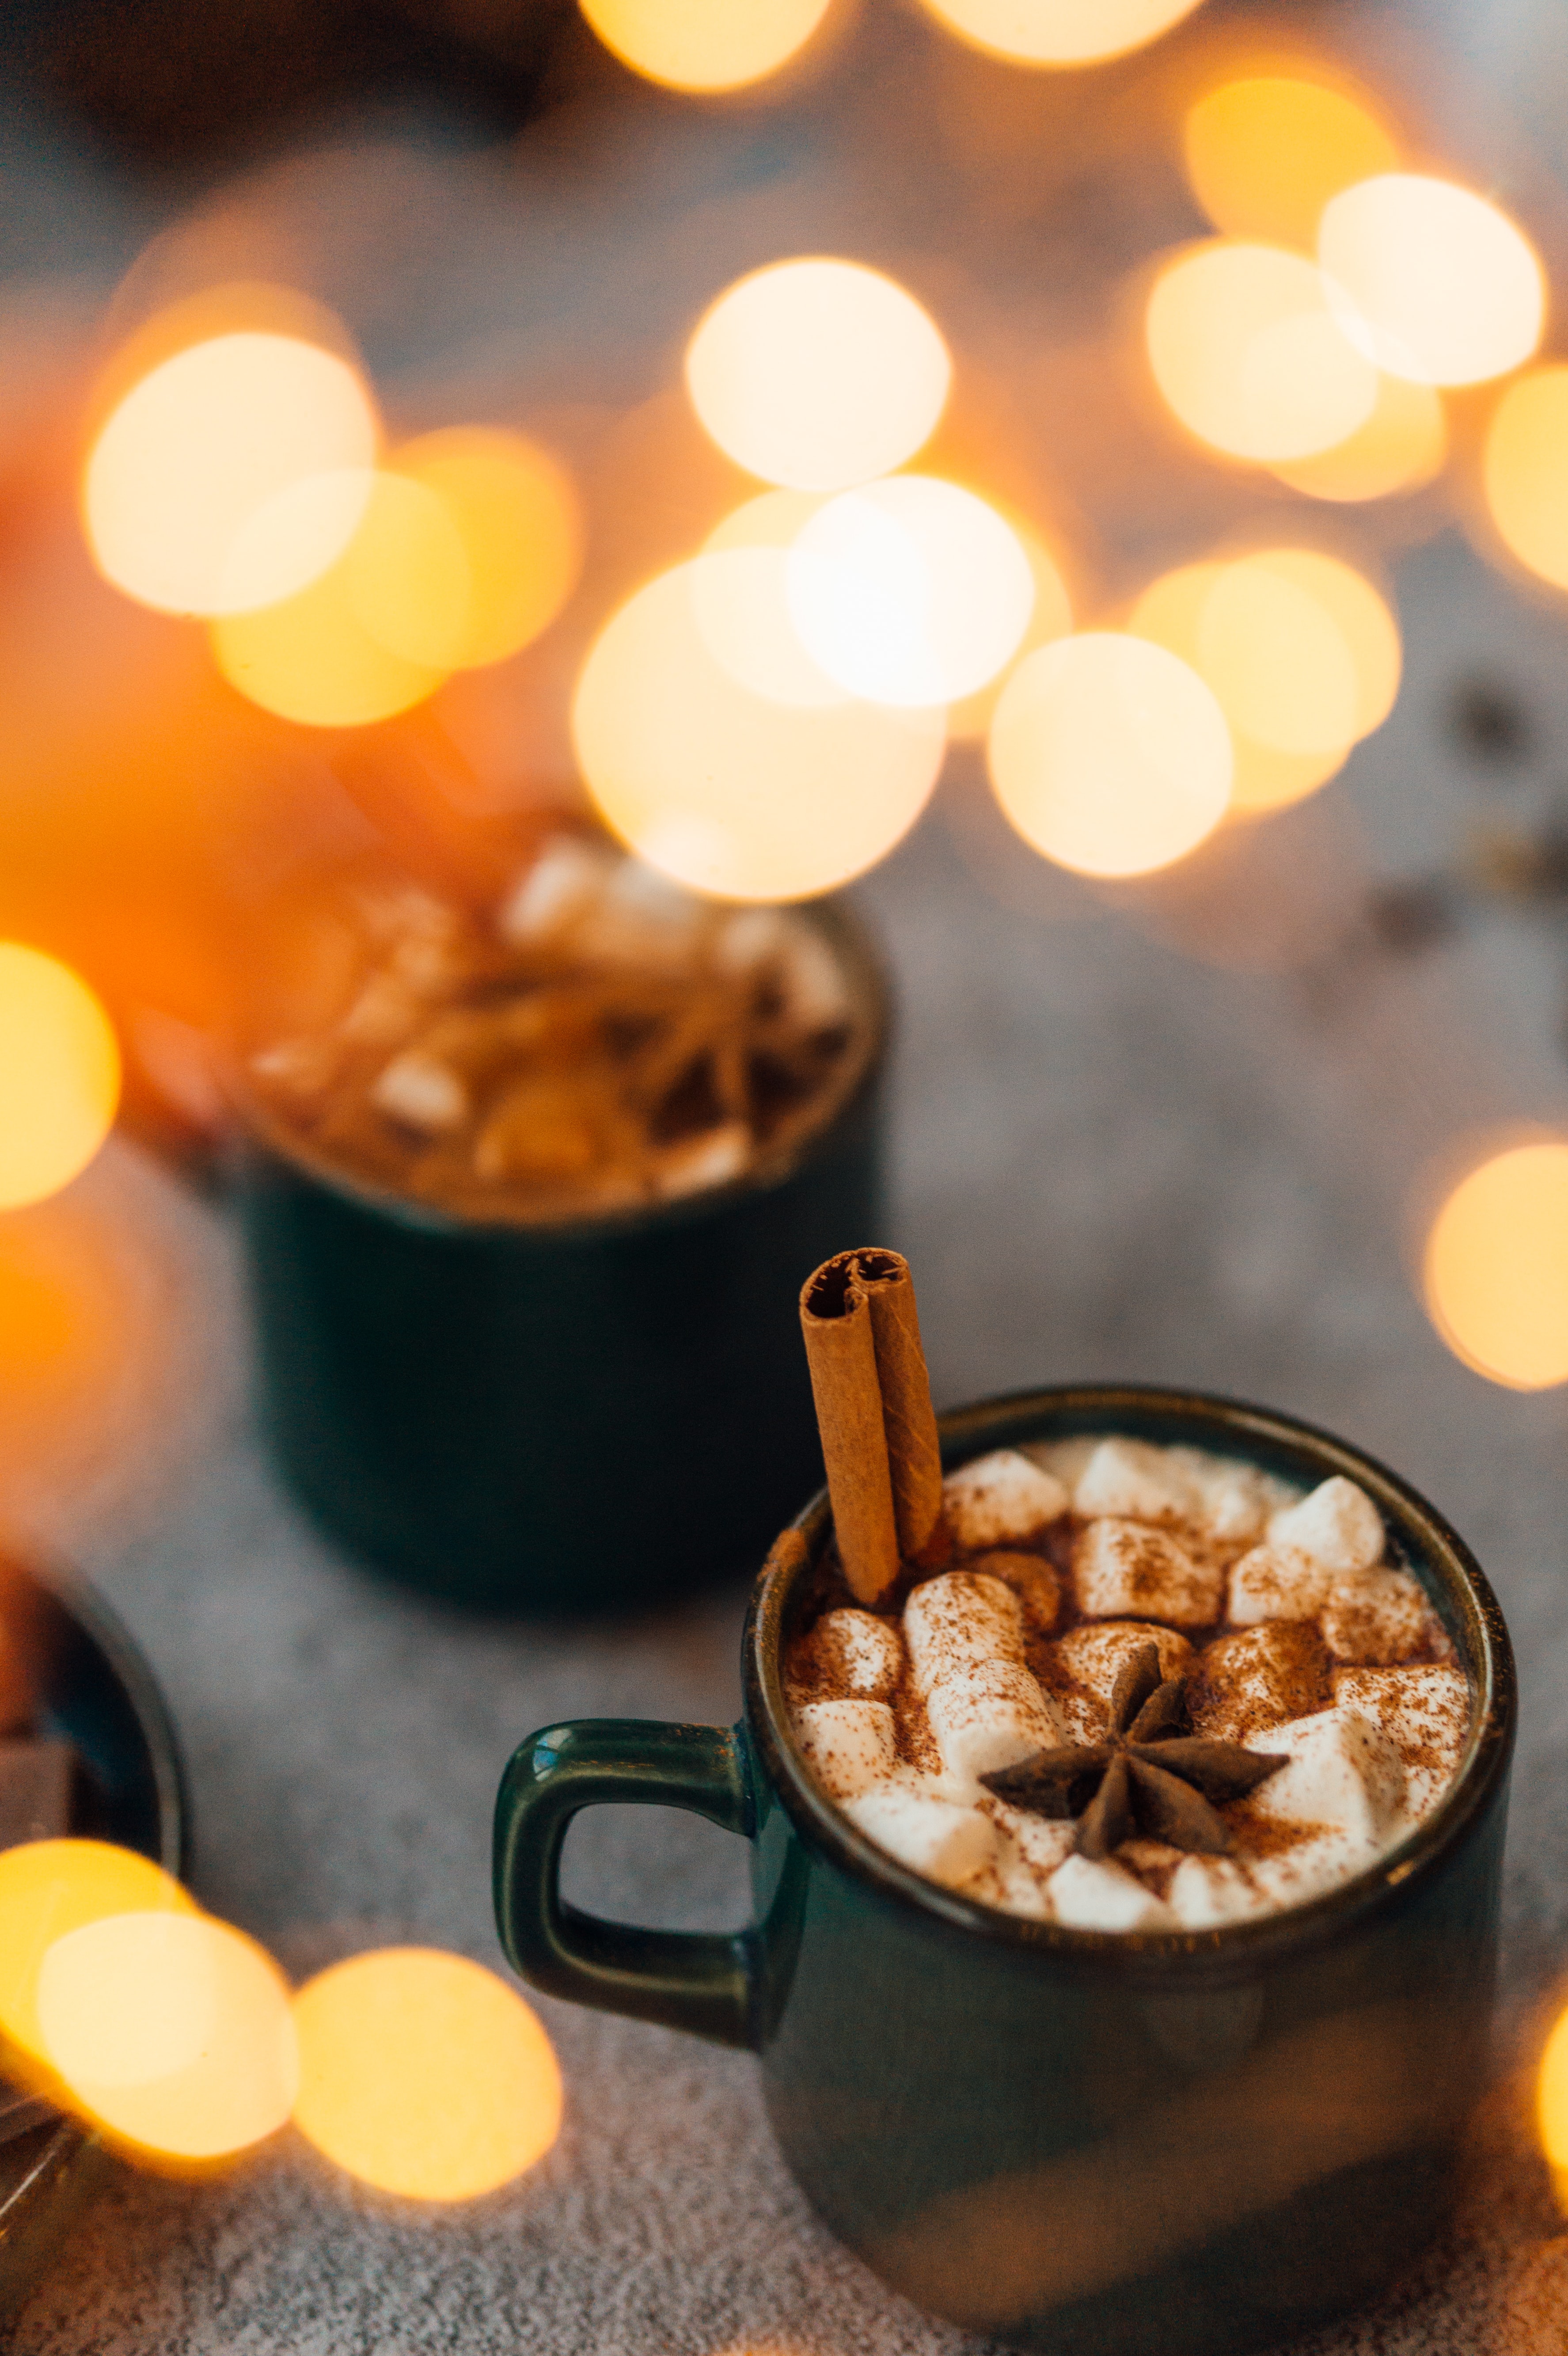 144993 download wallpaper glare, cup, food, cinnamon, bokeh, boquet, spice, spices, mug, marshmallow, zephyr, anise screensavers and pictures for free